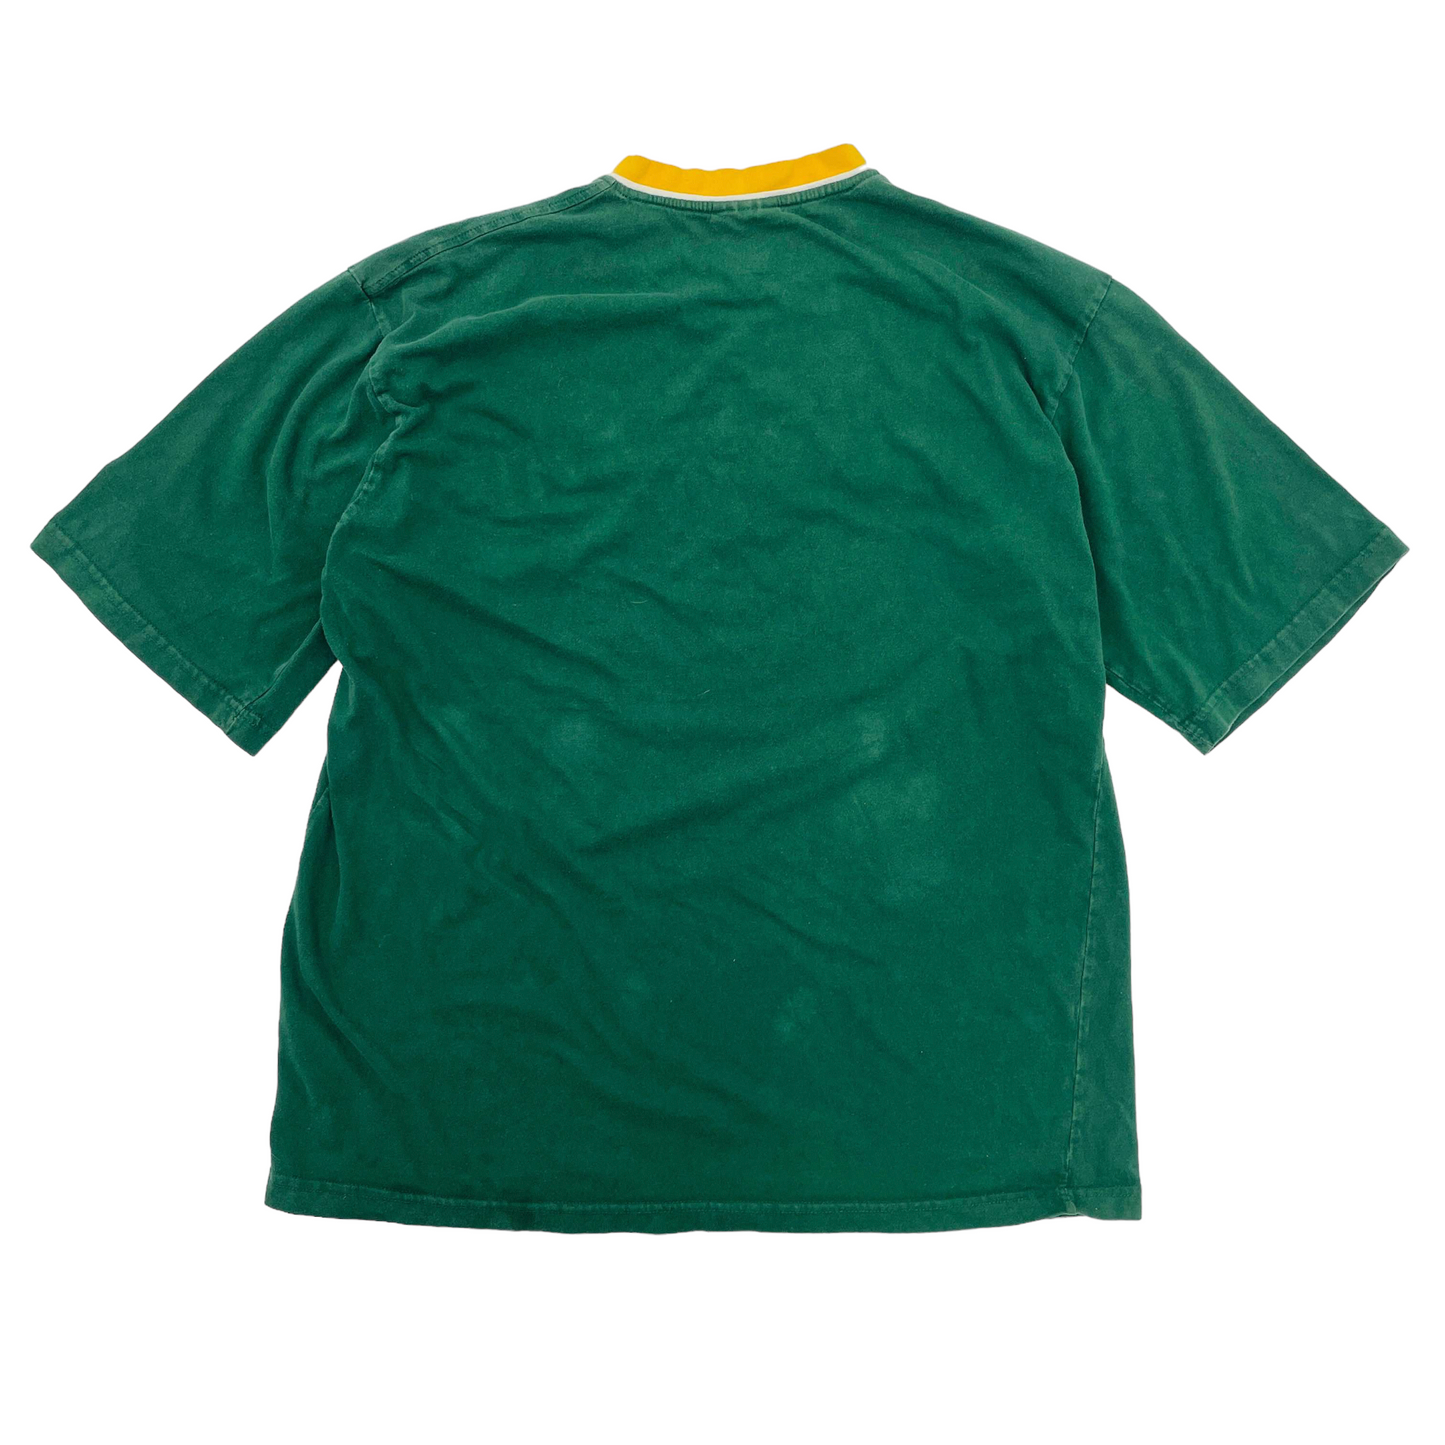 
                  
                    Green Bay Packers Pro Sport T-Shirt  - Large
                  
                